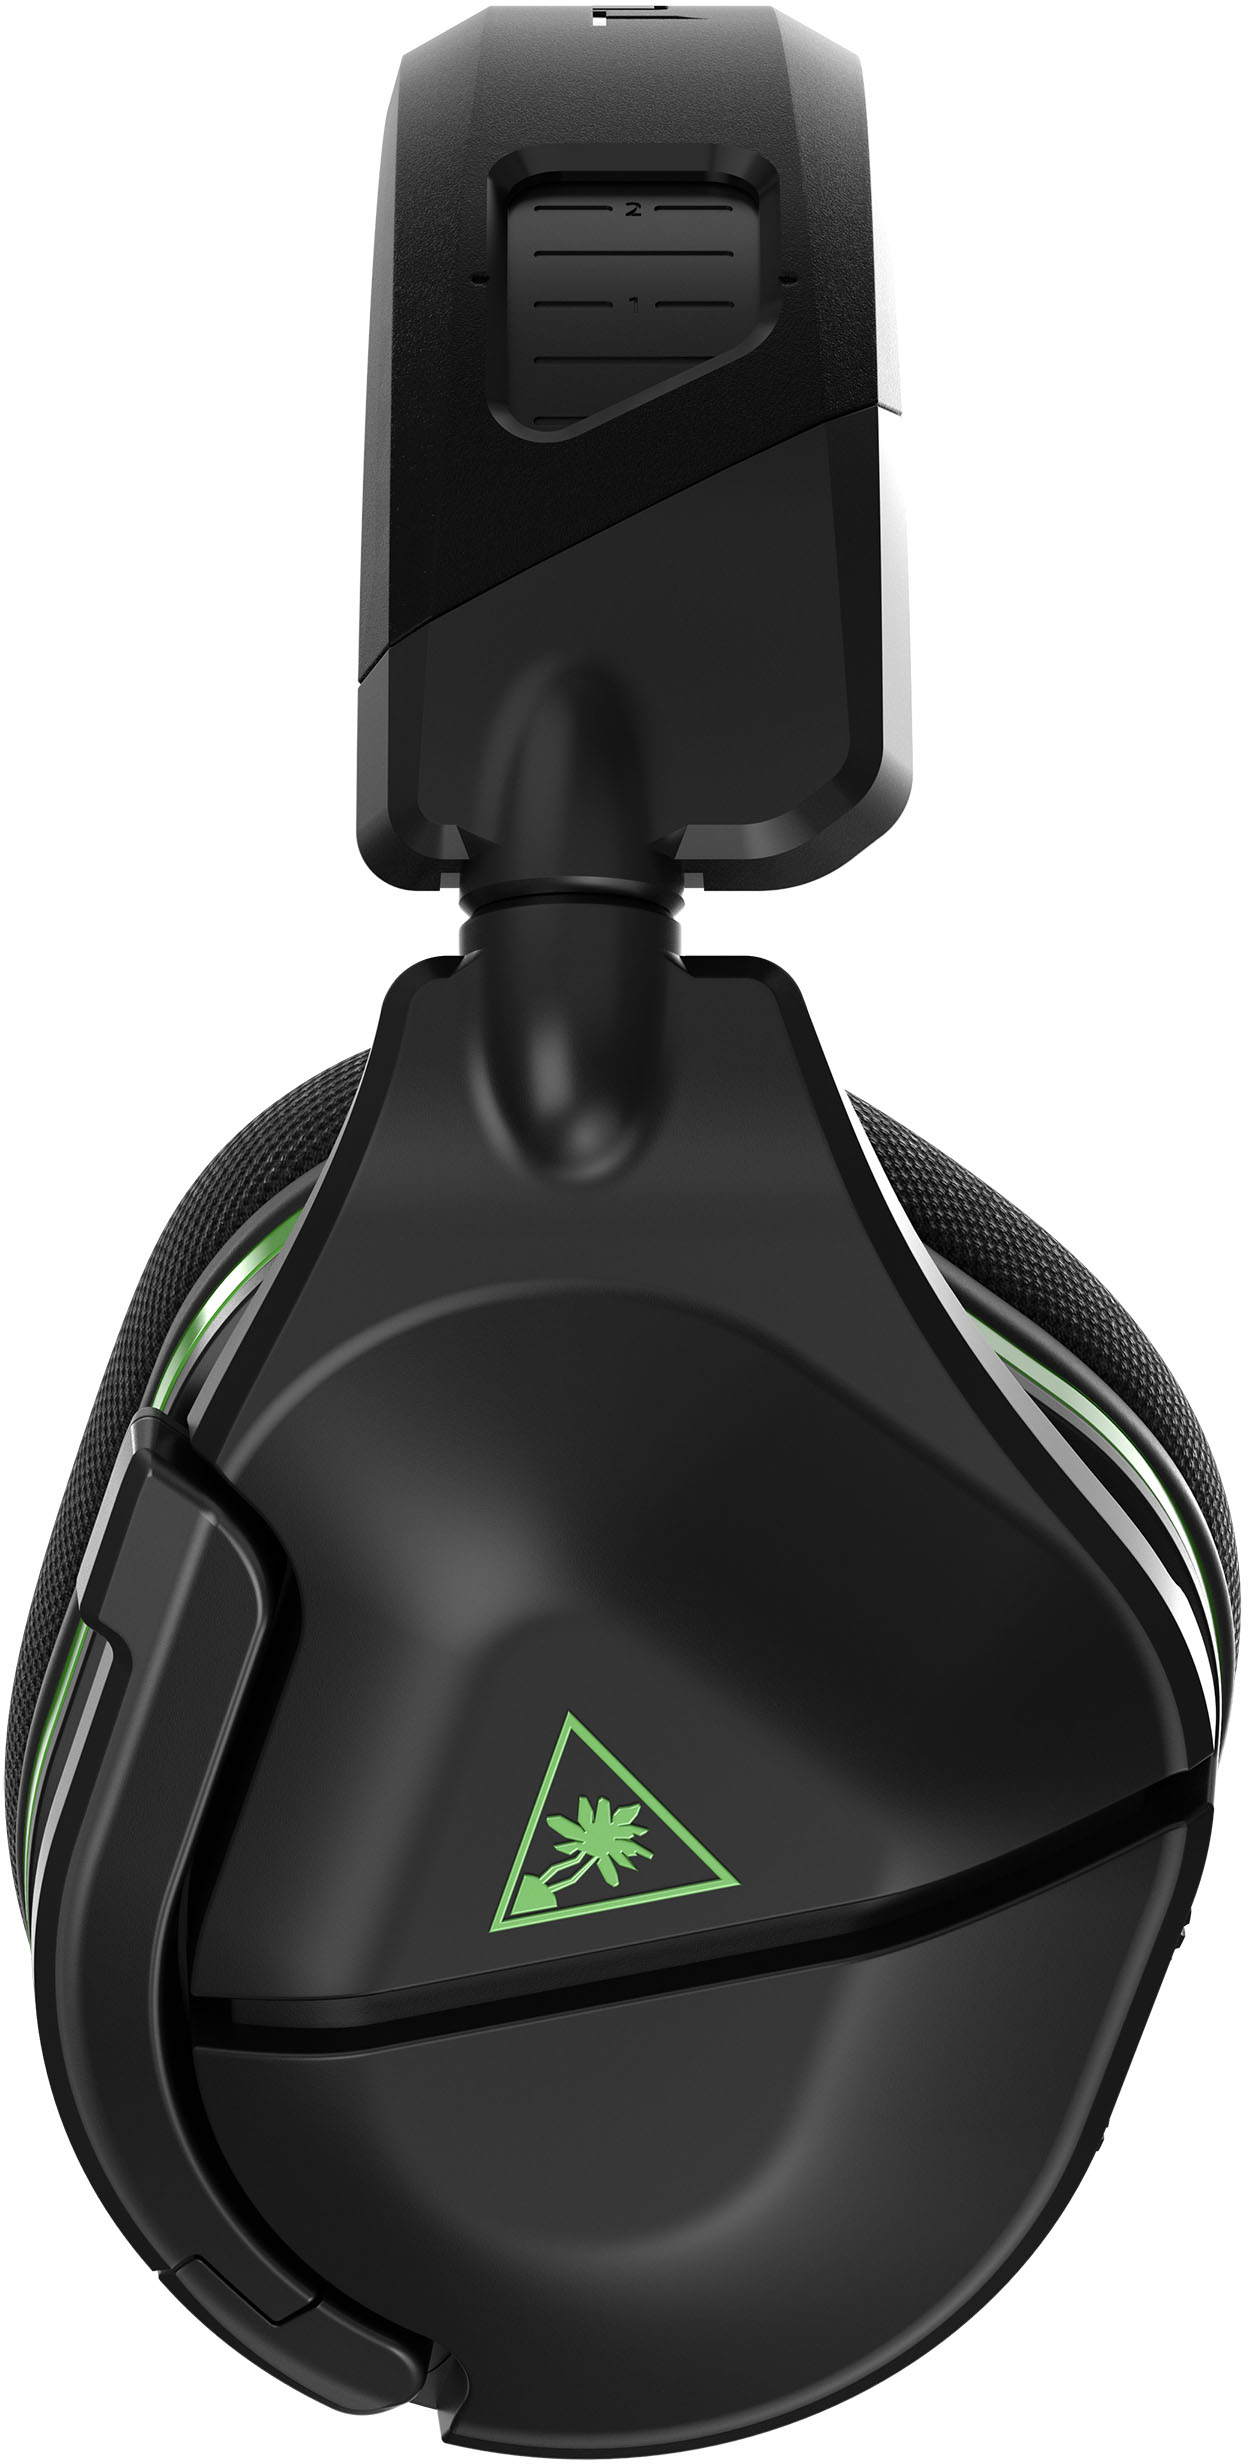 Turtle Beach Stealth 600 Gen 2 Headset for Xbox One/Series X Review -  CGMagazine